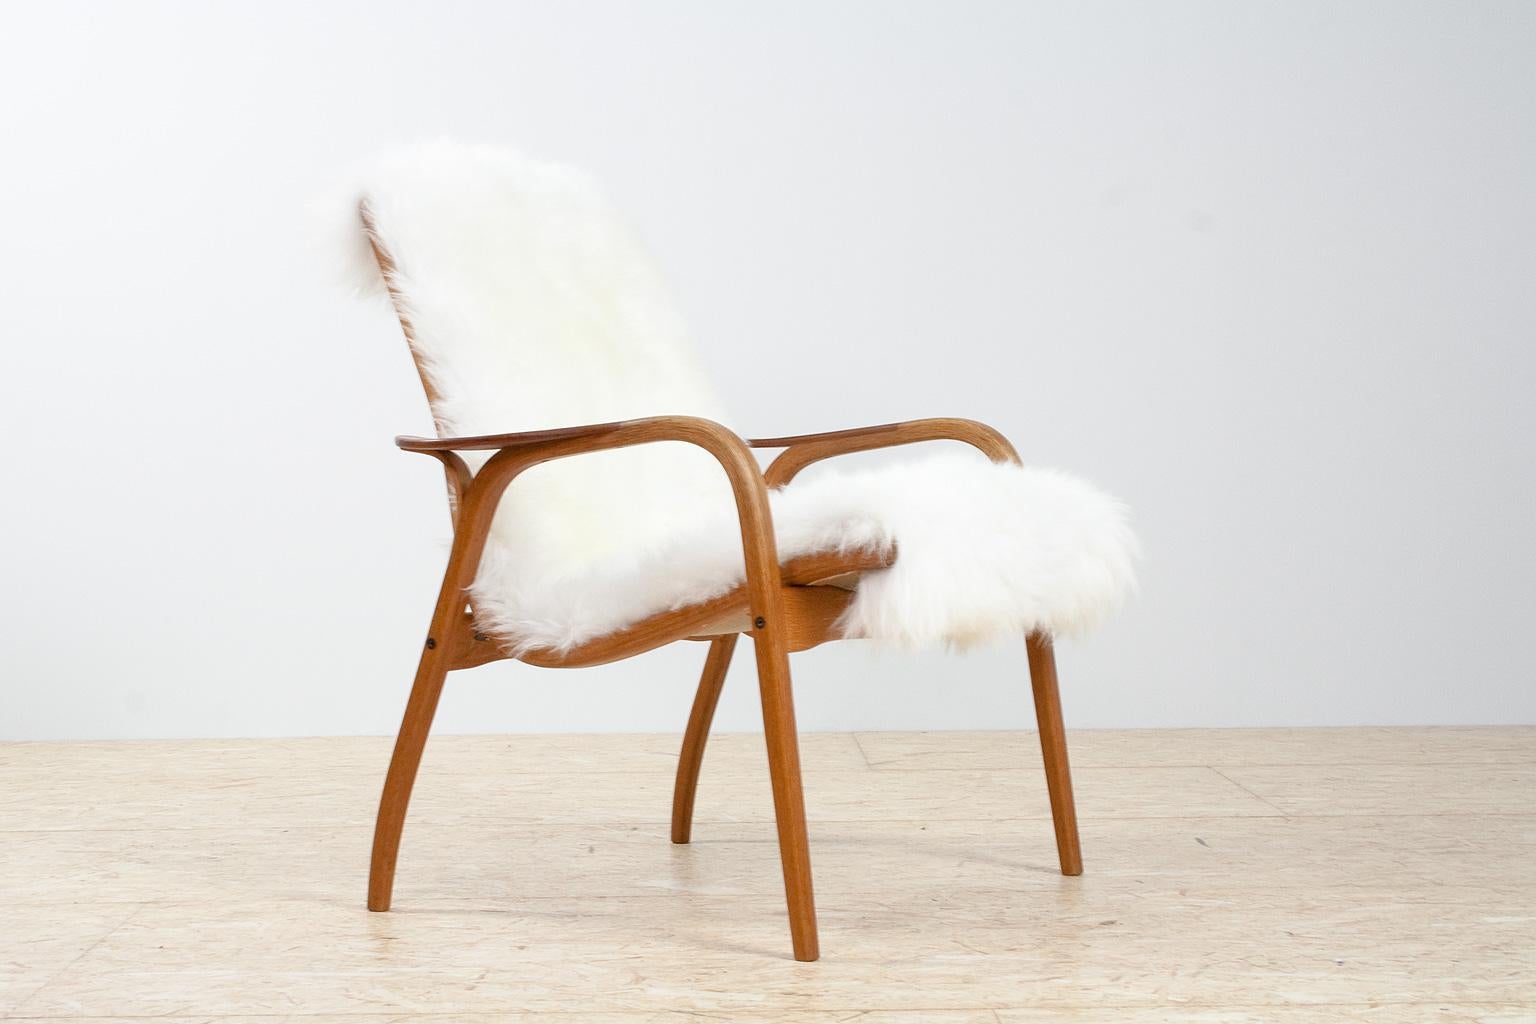 New upholstered Scandinavian modern Lamino chair, ladies' version with a lower back. Re-upholstered with a very high quality long haired sheep skin. This 'ladies' version has a lower back with delicately splayed legs, and elegant flared armrests.